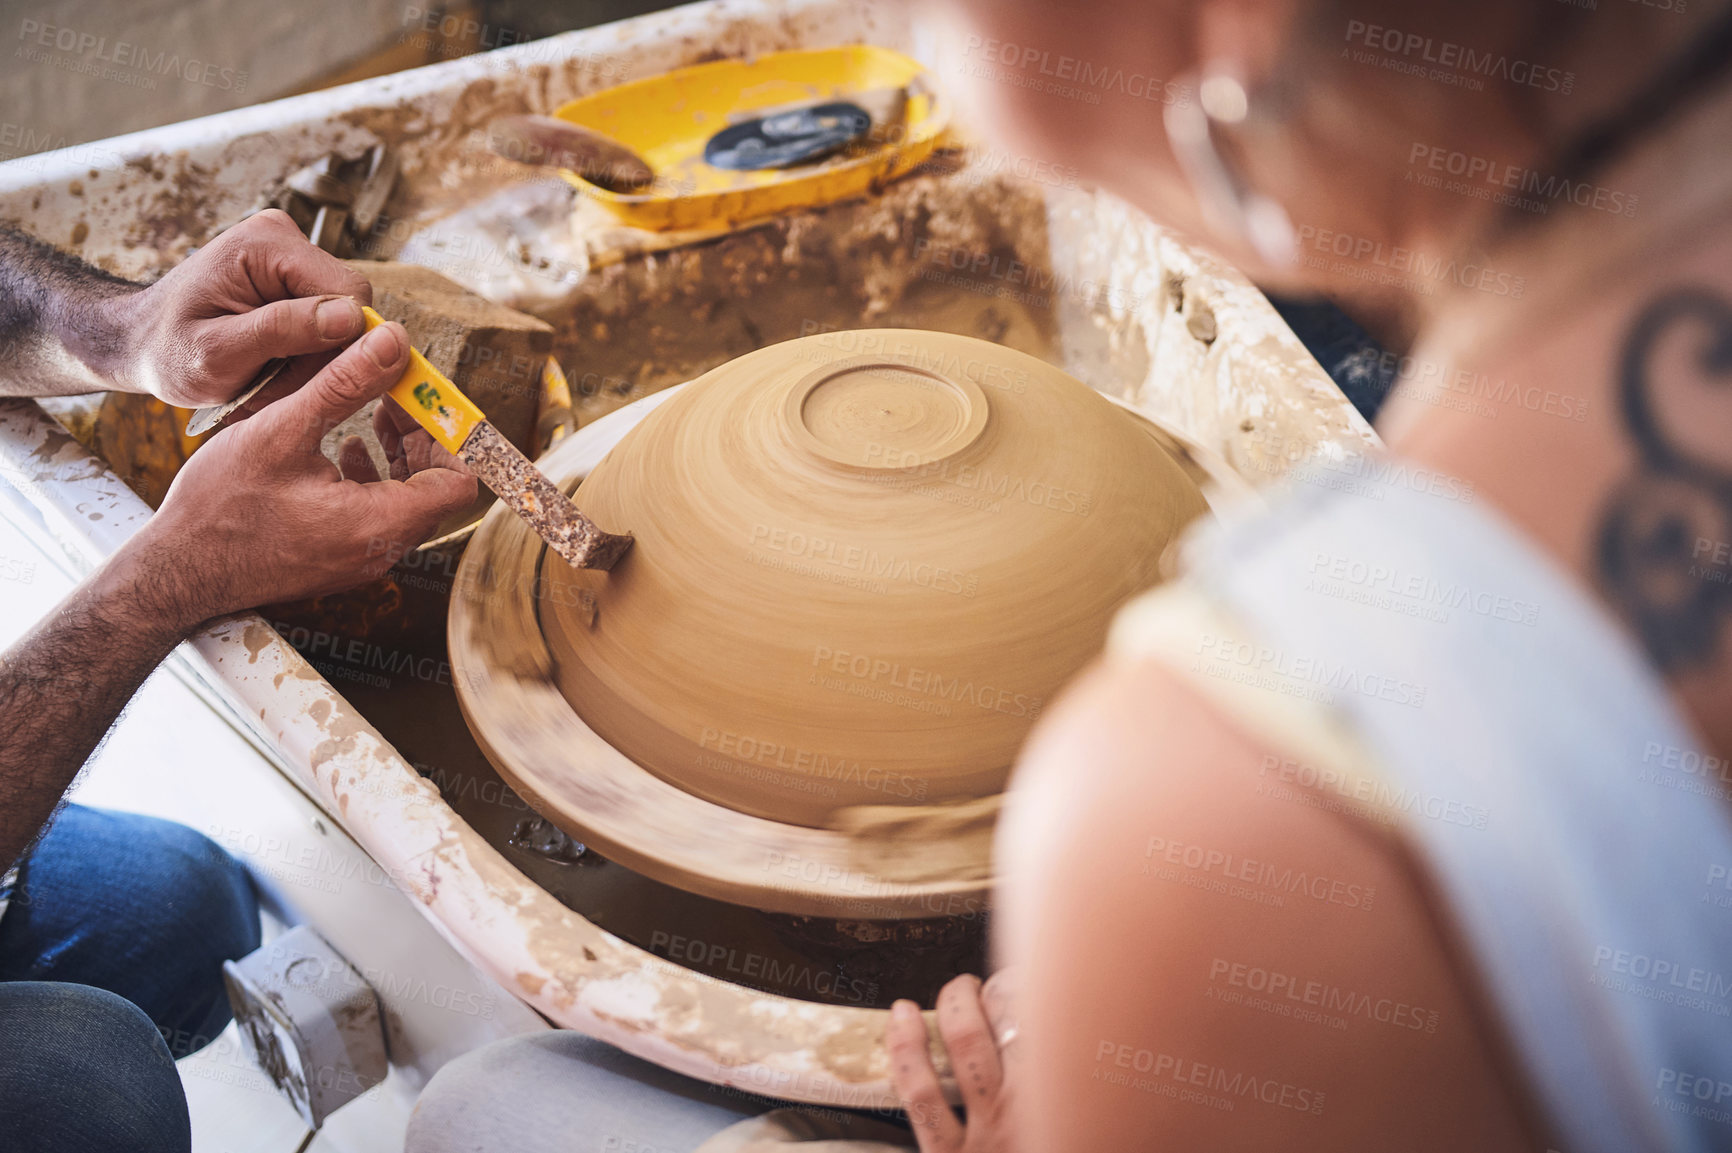 Buy stock photo Shot of an unrecognisable woman working with clay in a pottery studio